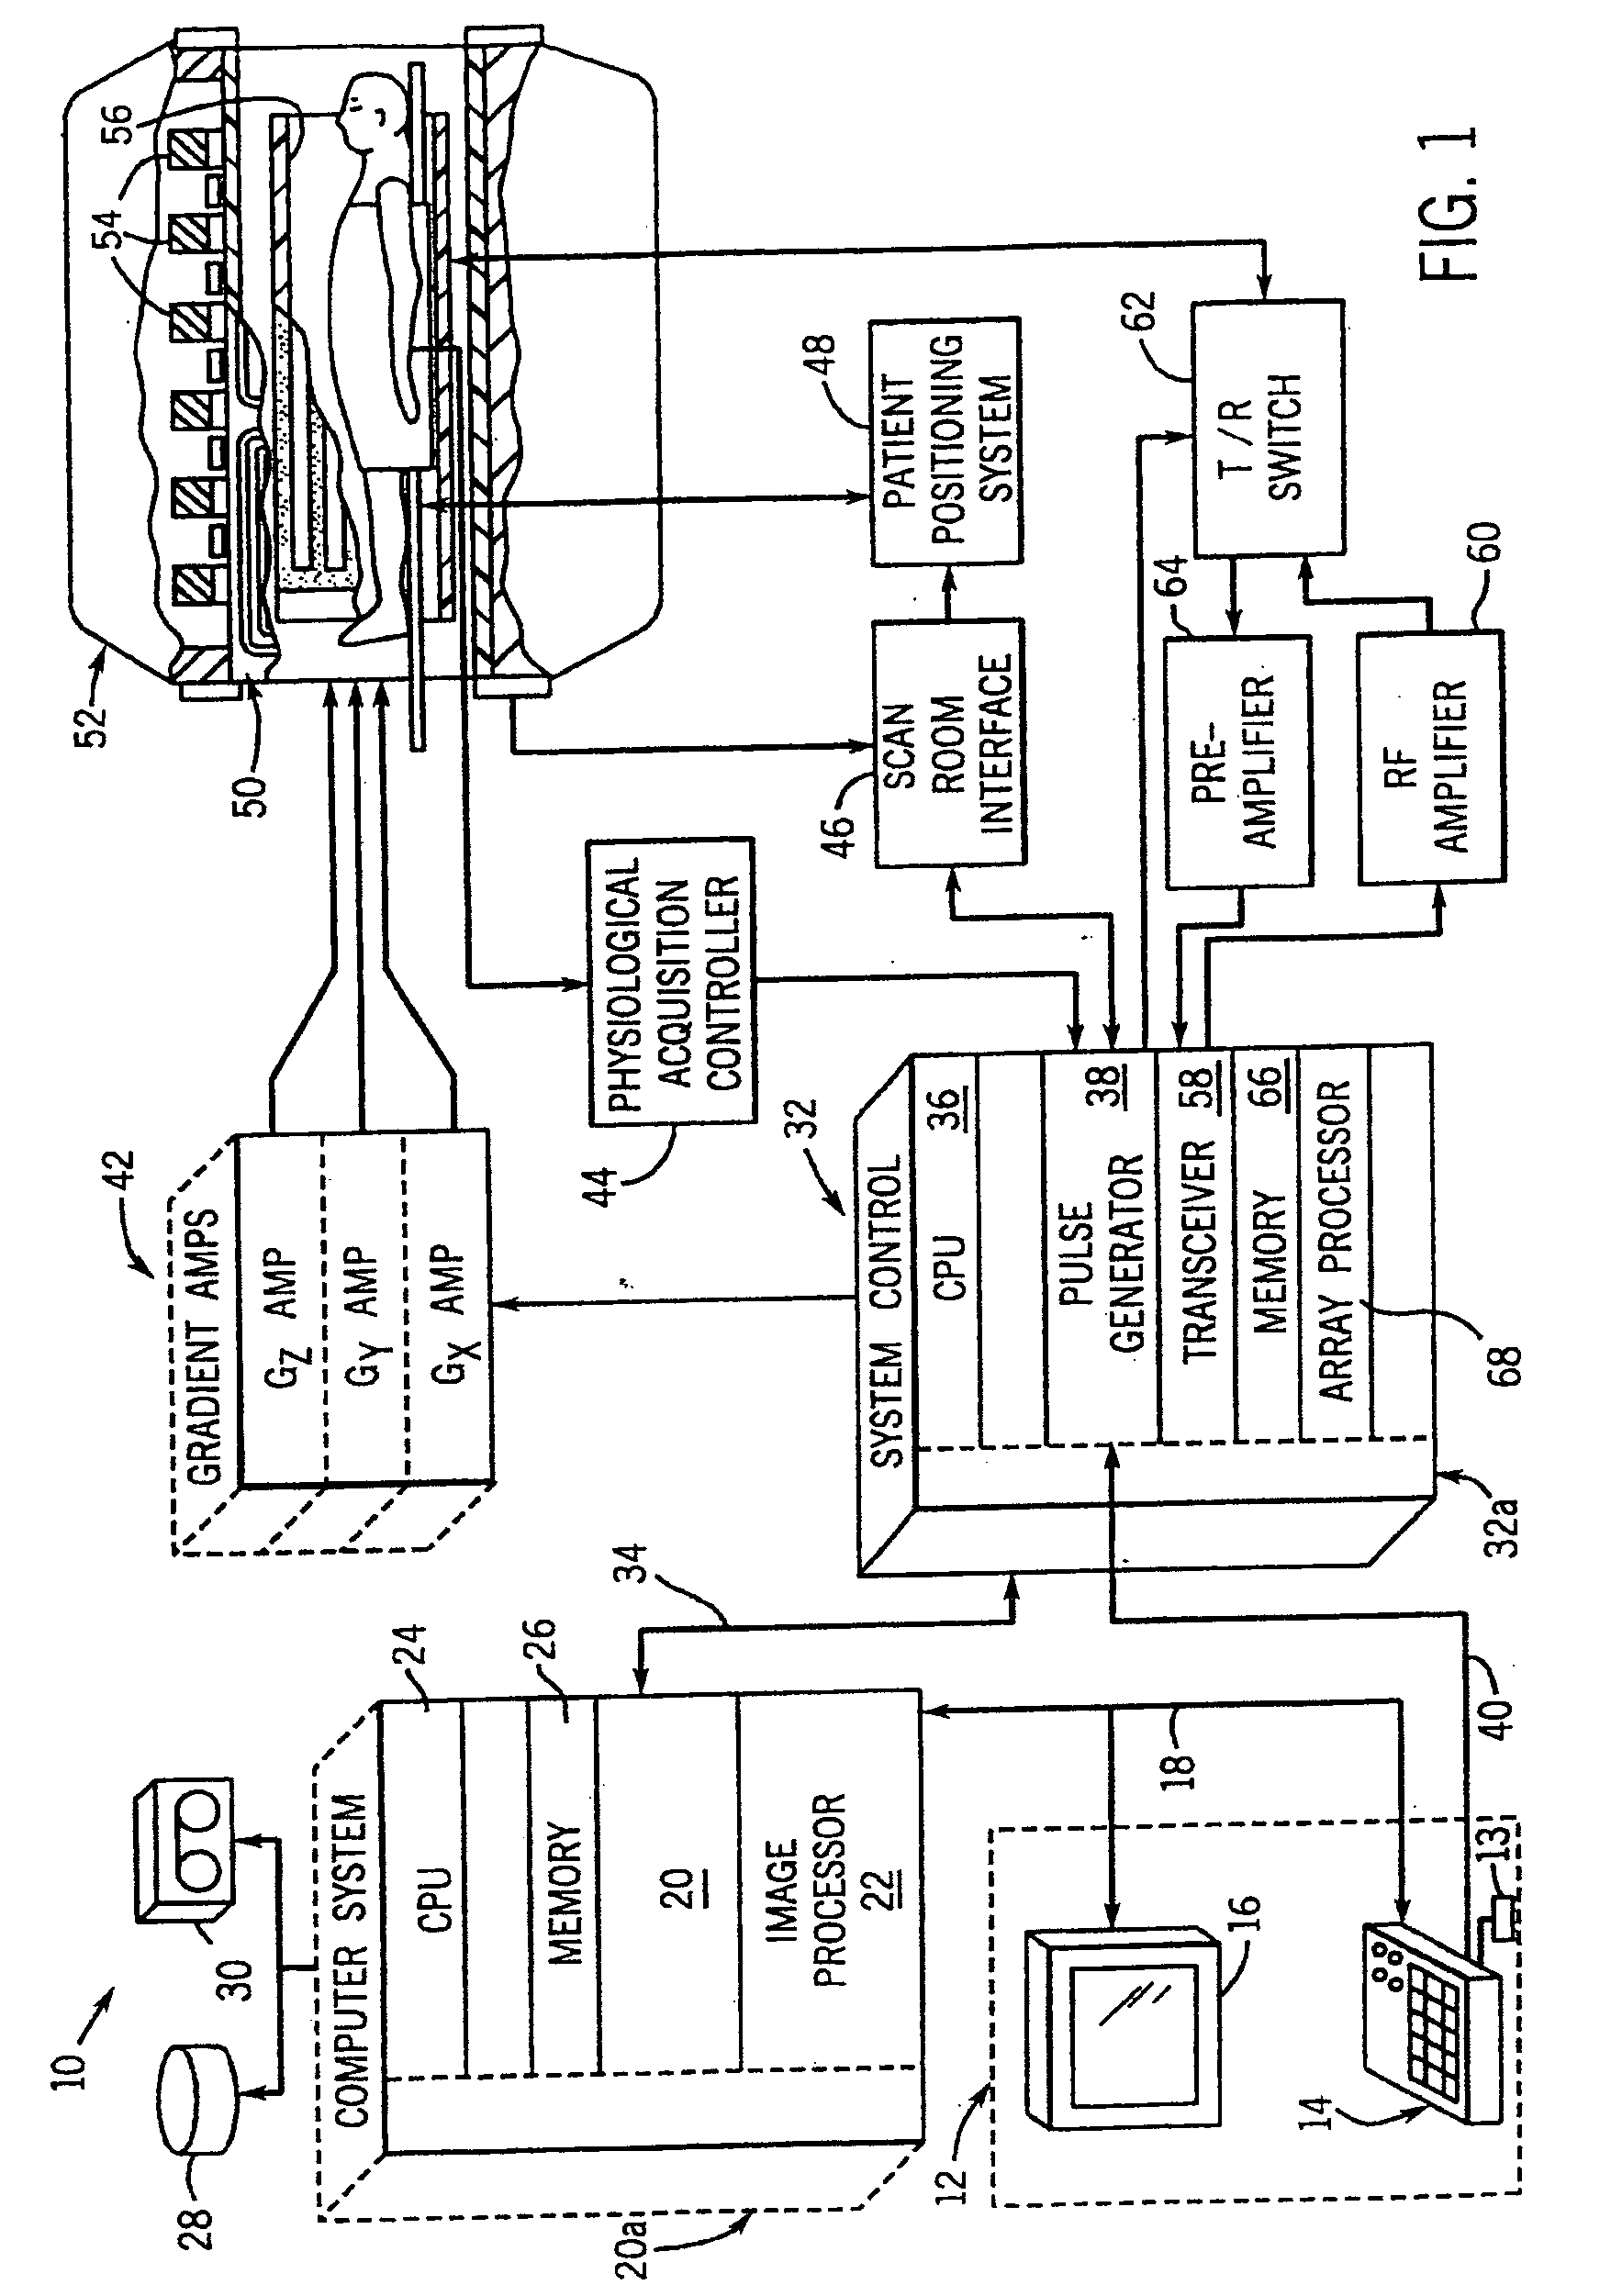 Method and apparatus to generate an RF excitation consistent with a desired excitation profile using a transmit coil array